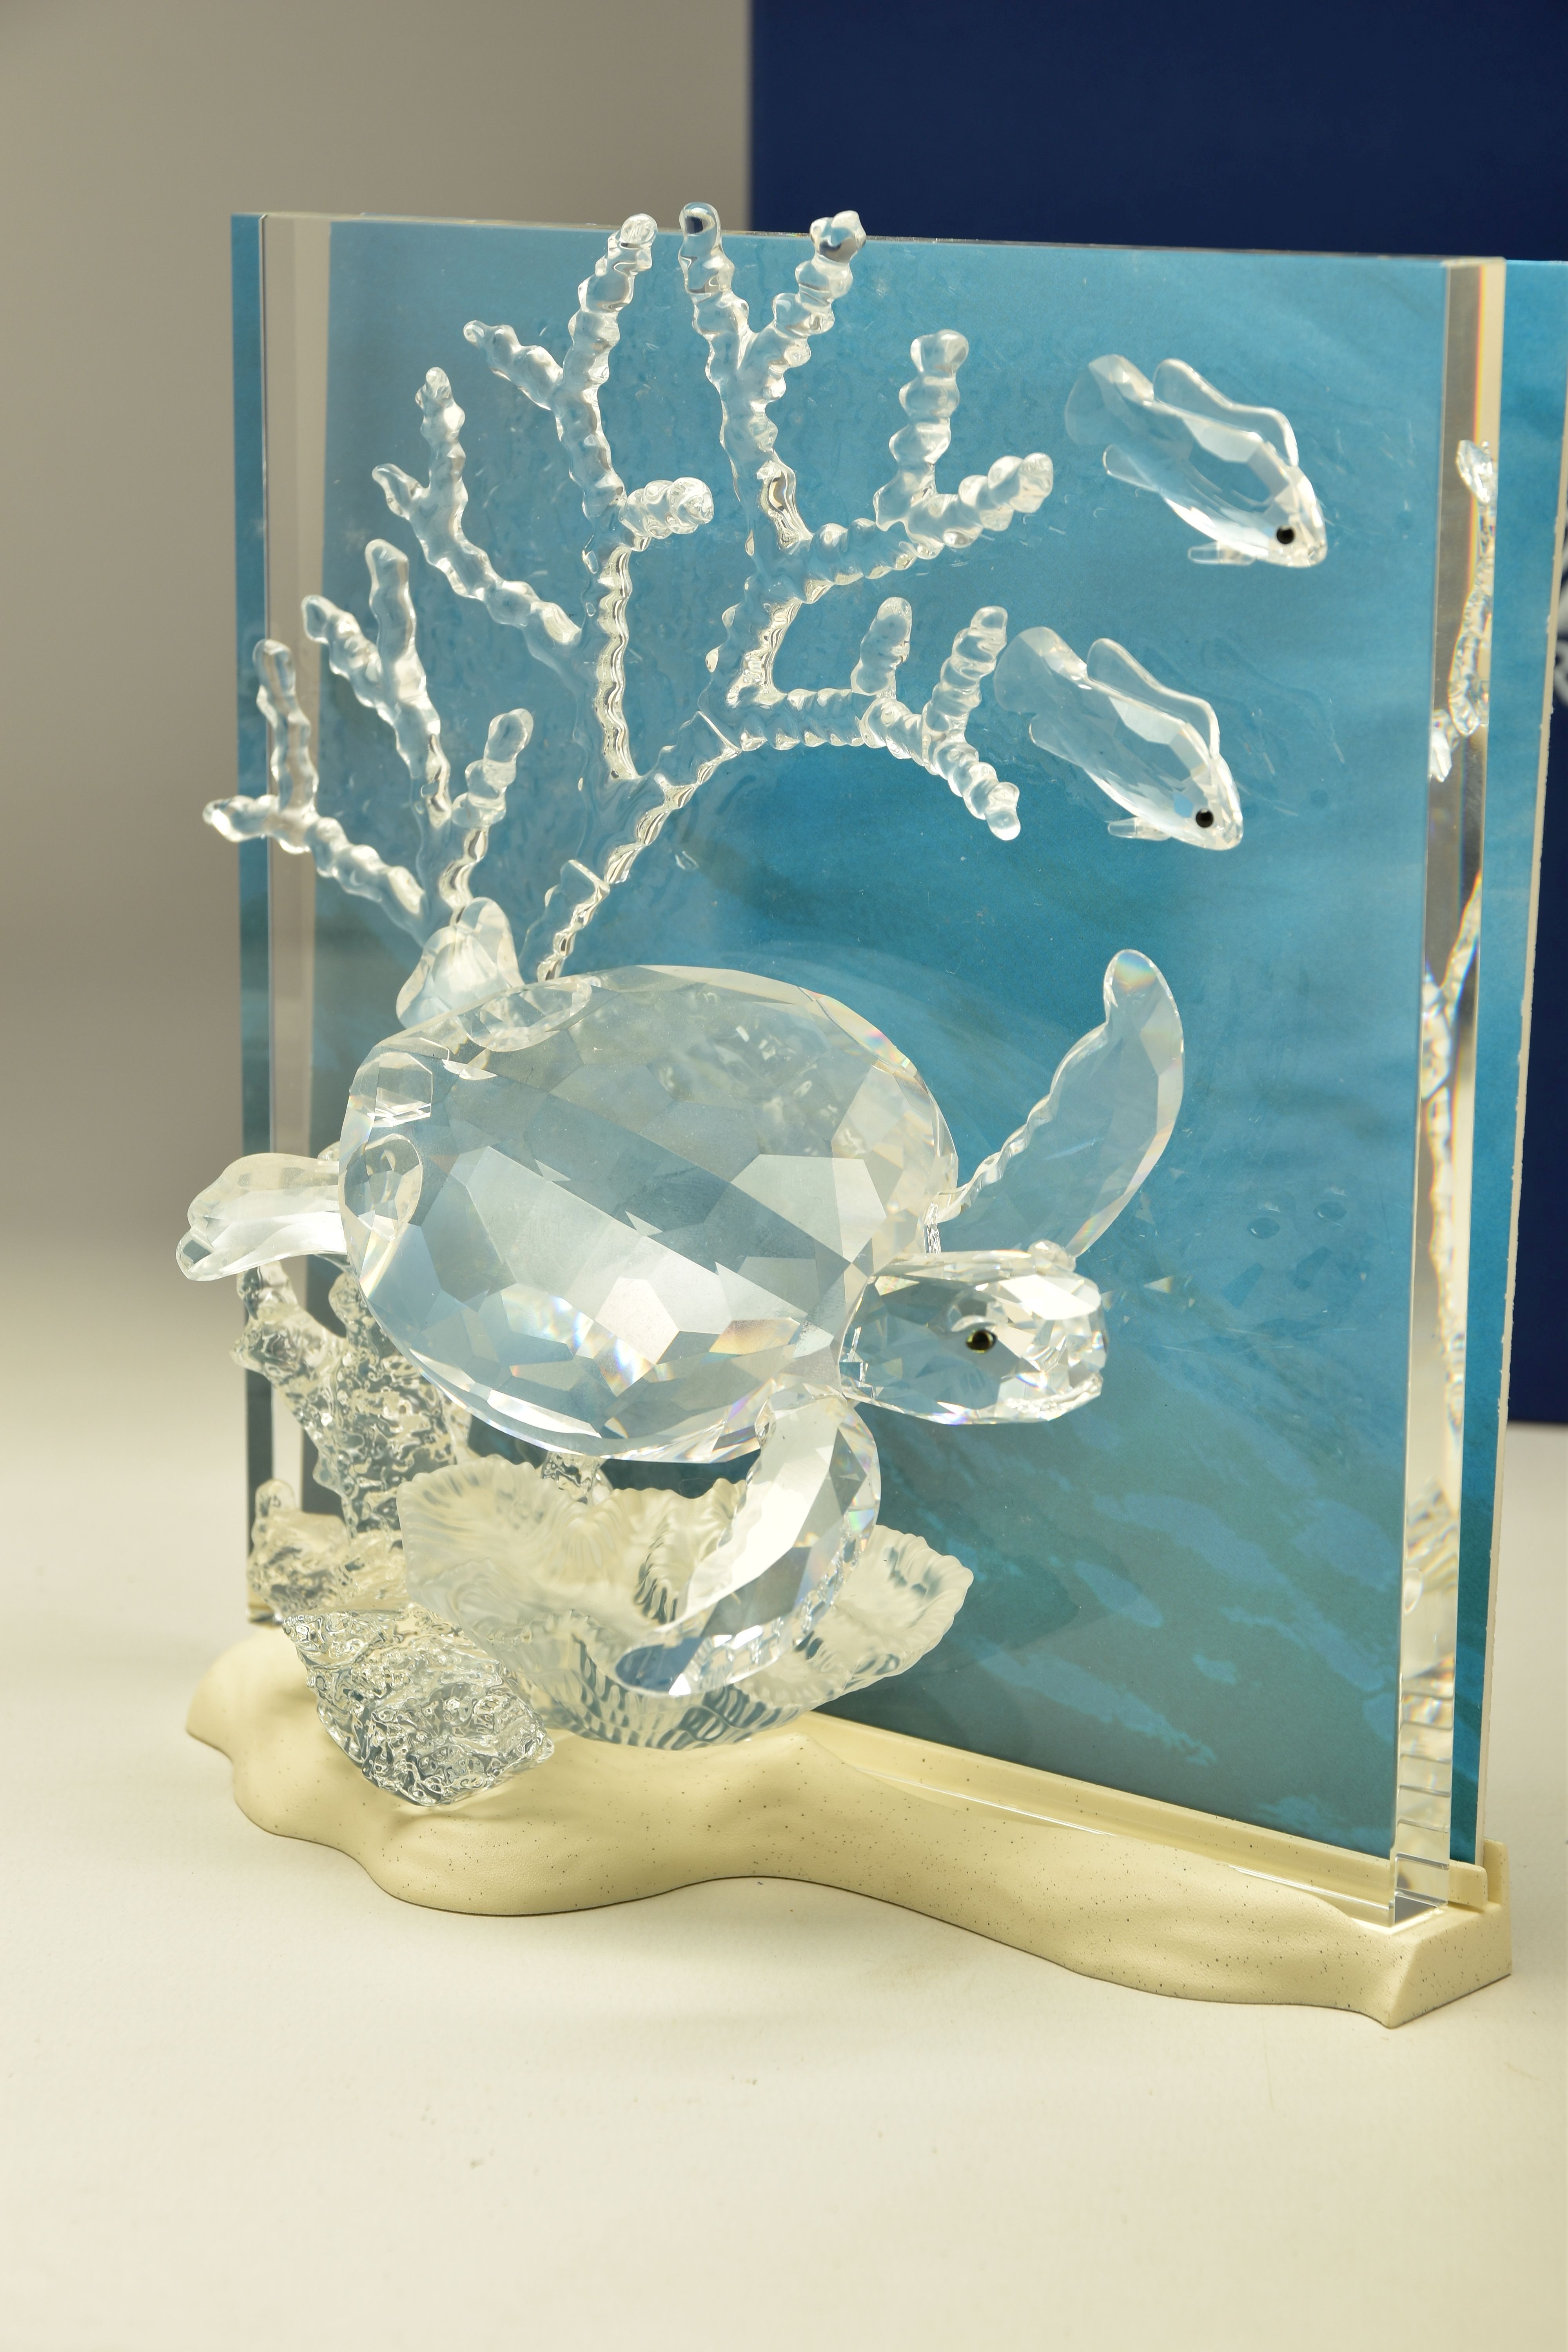 A BOXED SWAROVSKI CRYSTAL SOCIETY DIORAMA, SECOND PIECE OF THE TRILOGY WONDERS OF THE SEA - ETERNITY - Image 2 of 5